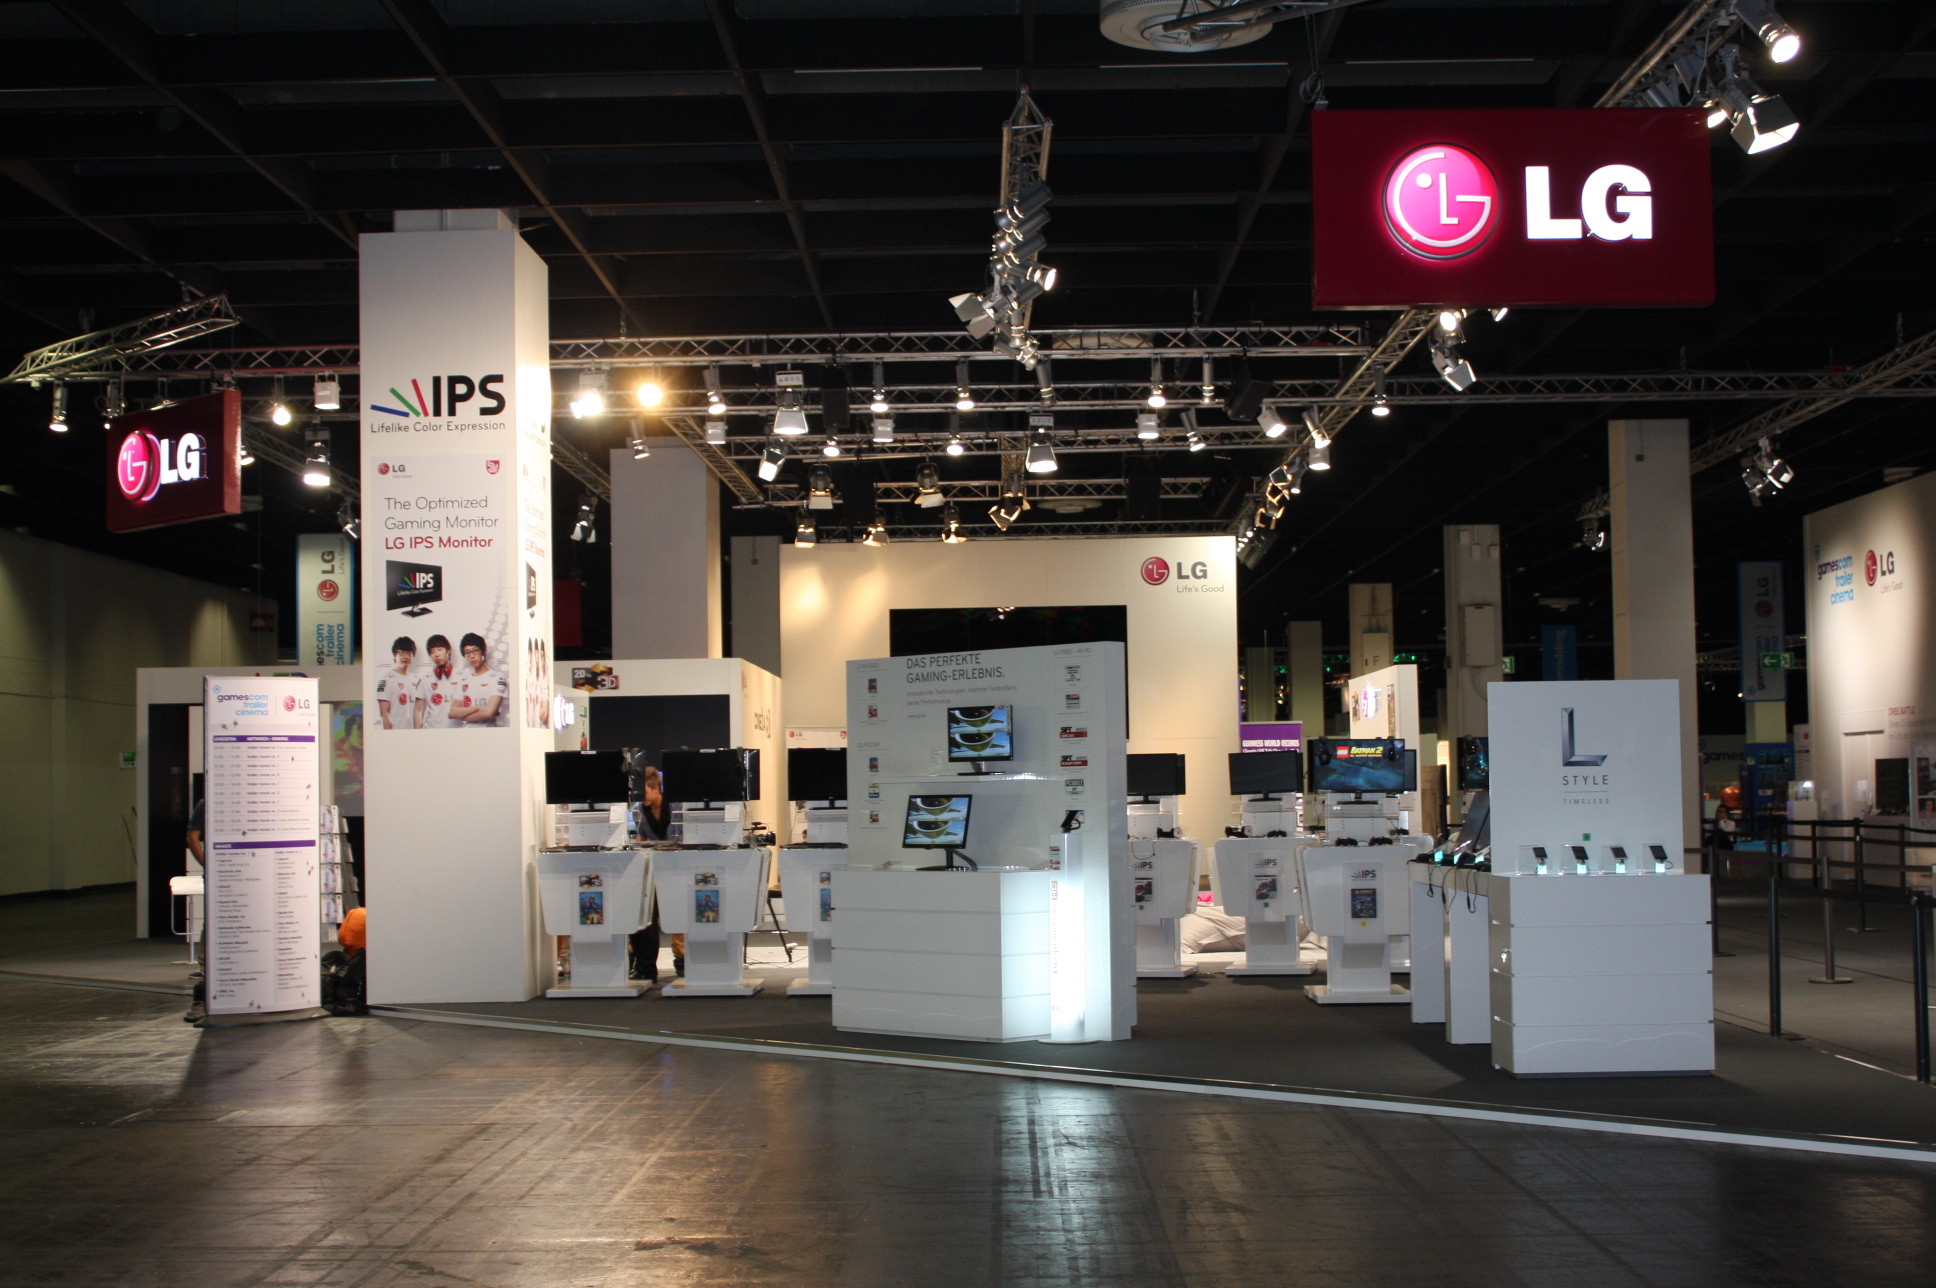 A wide view of LG’s booth and its many IPS monitors at GAMESCOM 2012